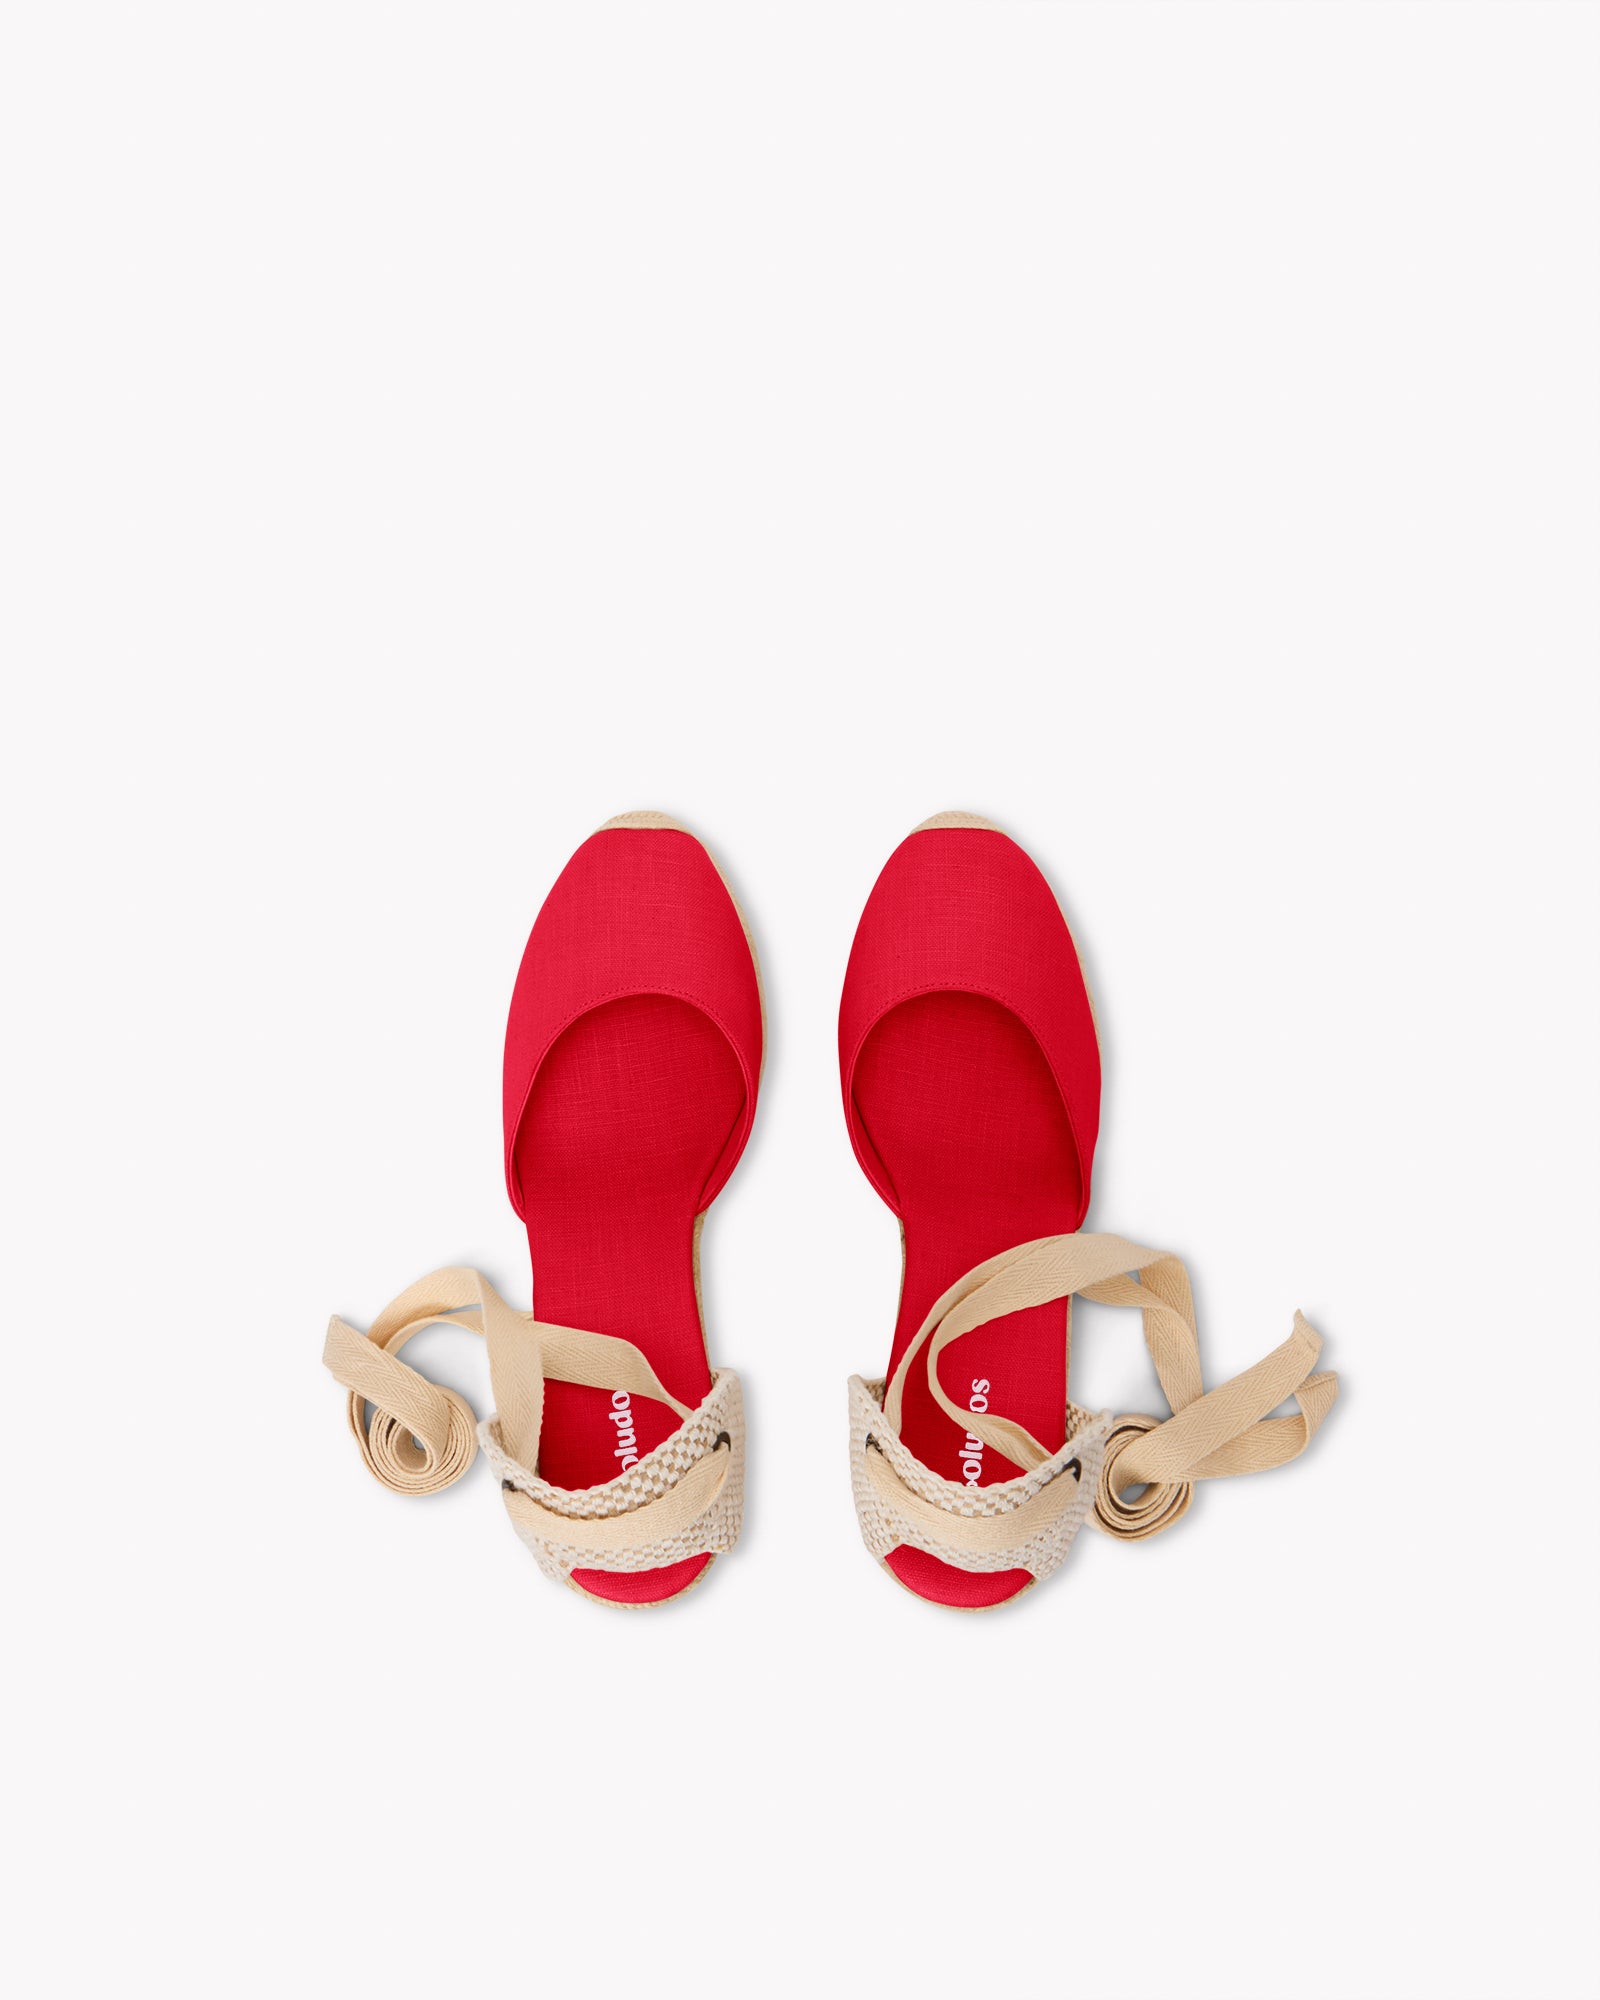 The Marseille Wedge - Classic - Flamenco Red